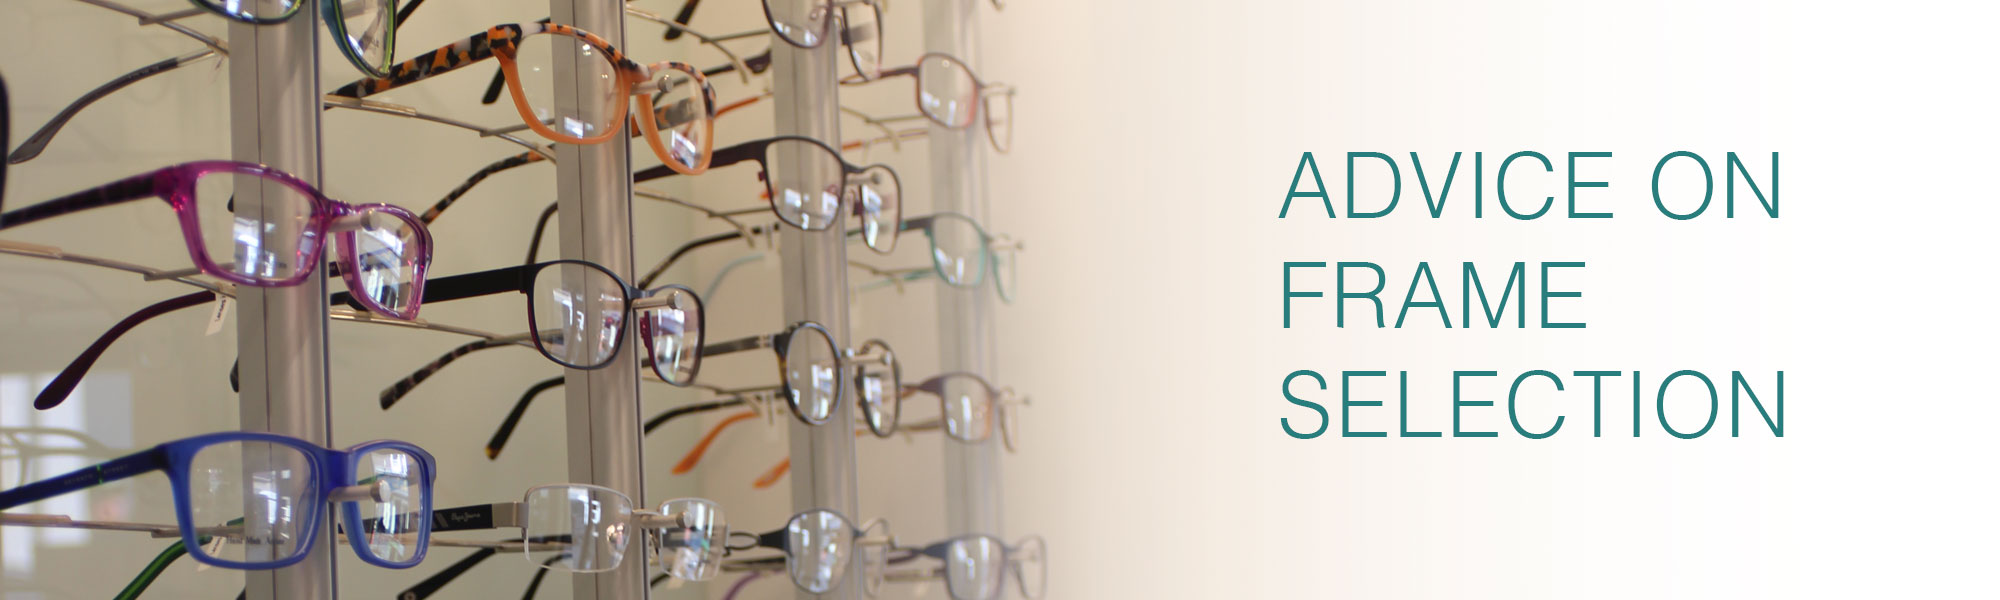 Advice on frame selection at Foley Opticians Wexford